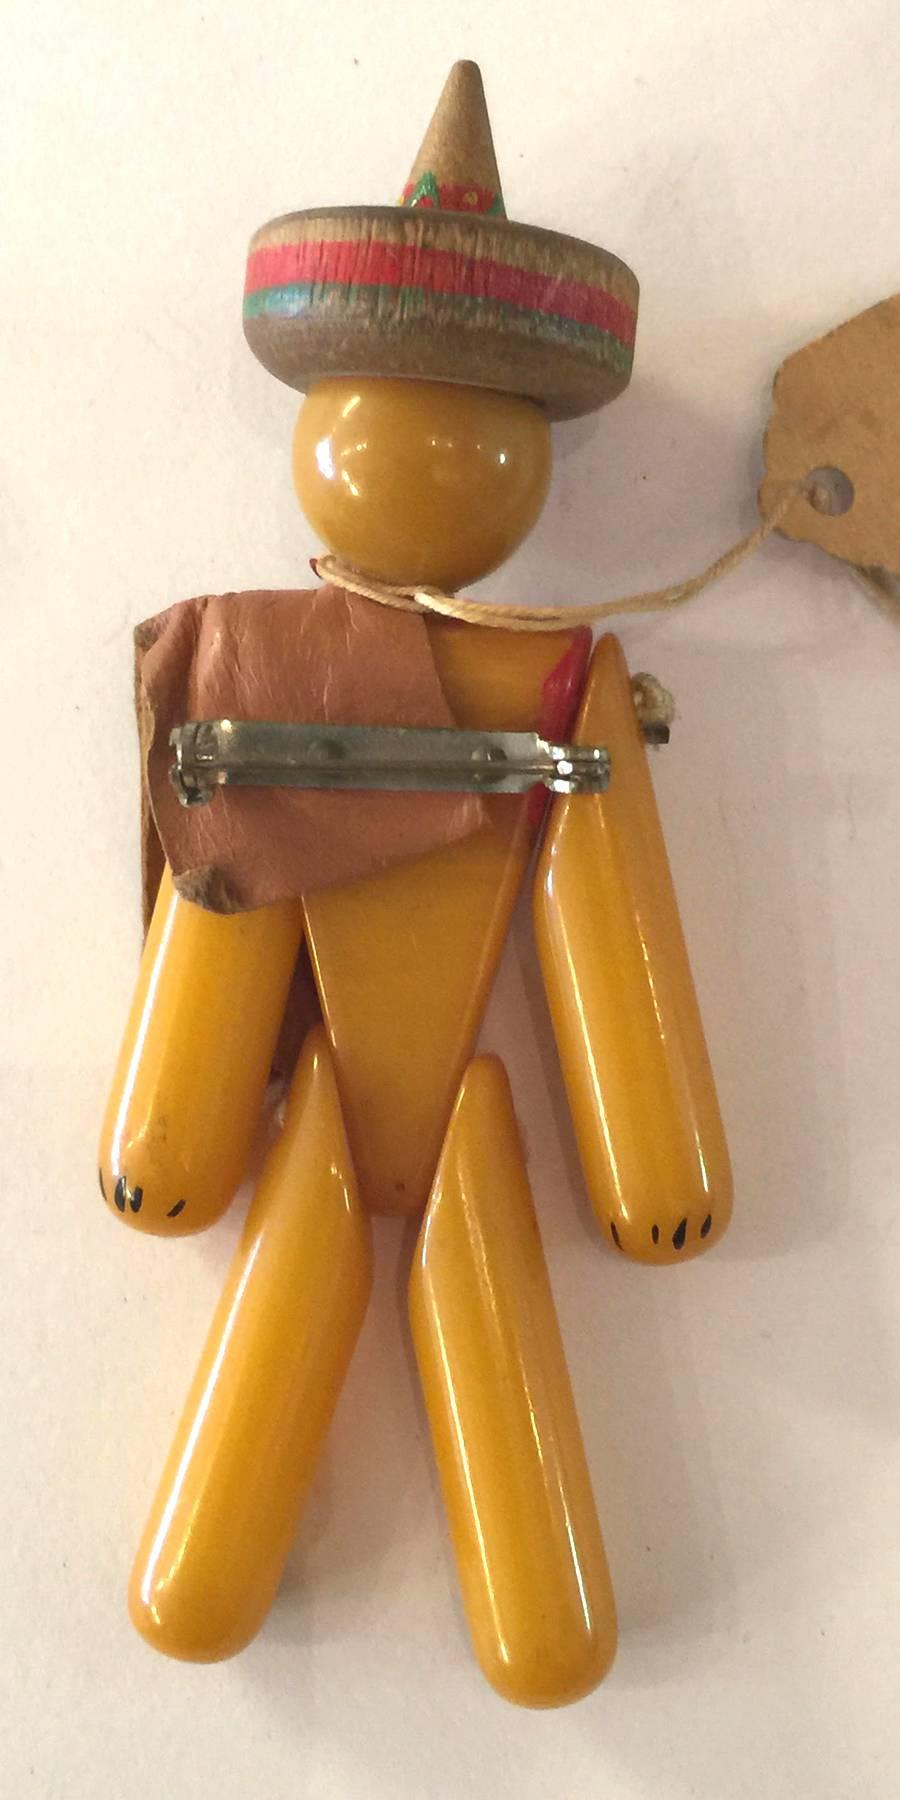 Figural bakelite brooches and pins are always filled with wit and whimsy, and this Mexican Smoking man articulated figure pin certainly delivers on that hope and promise. A combination of bakelite torso, head, arms and legs held together with brass